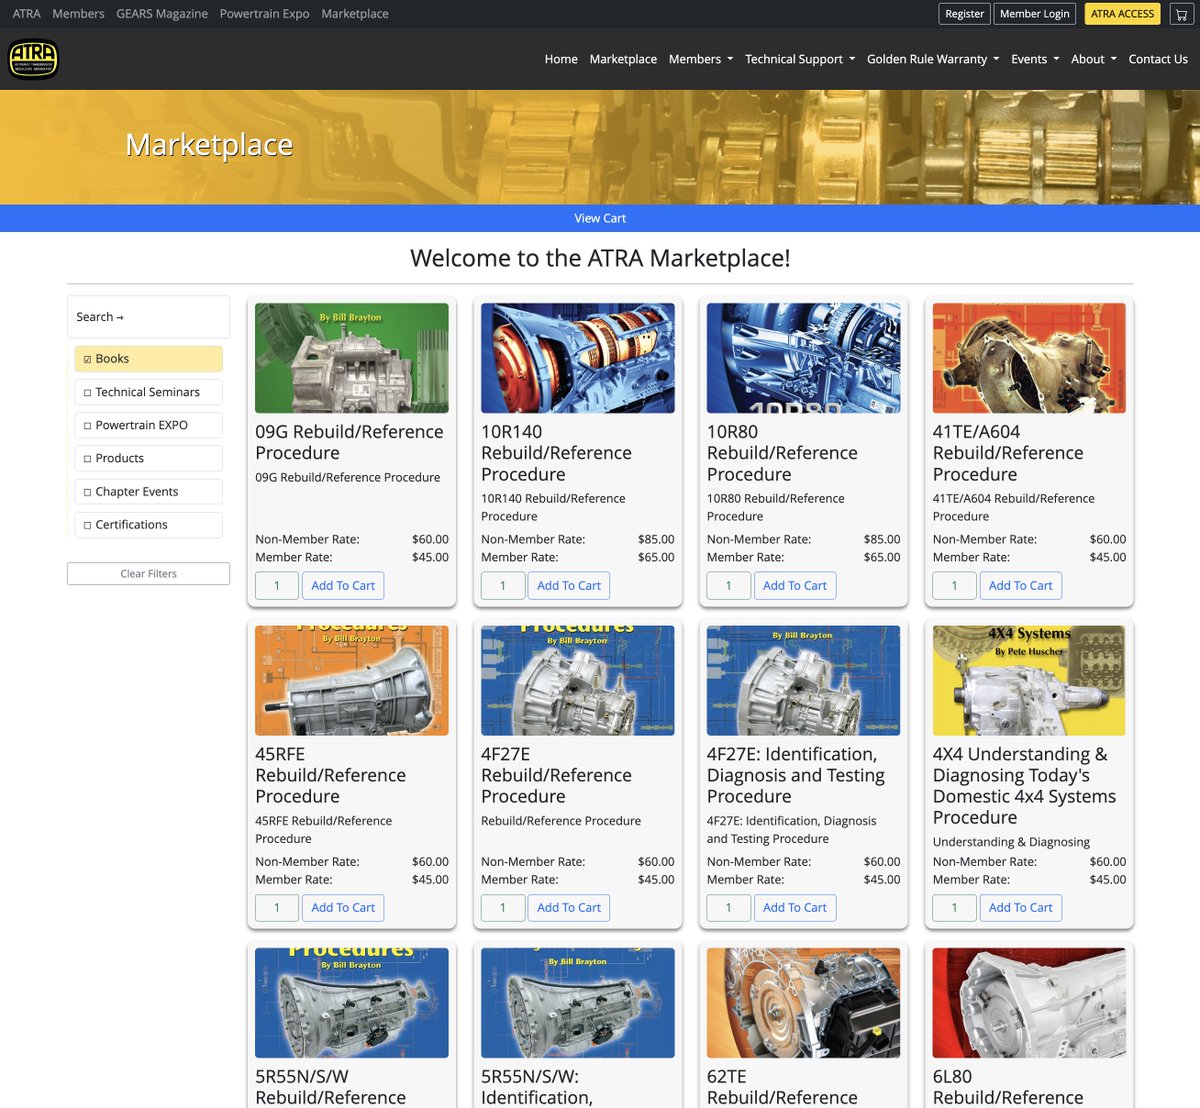 In need of some new books before hitting Expo this year? You can buy your manuals, Tech Seminar Registration, and more online in the ATRA Marketplace! members.atra.com/marketplace?f=2  #atra #GEARSMagazine #automatictransmissions #powertrainindustrynews